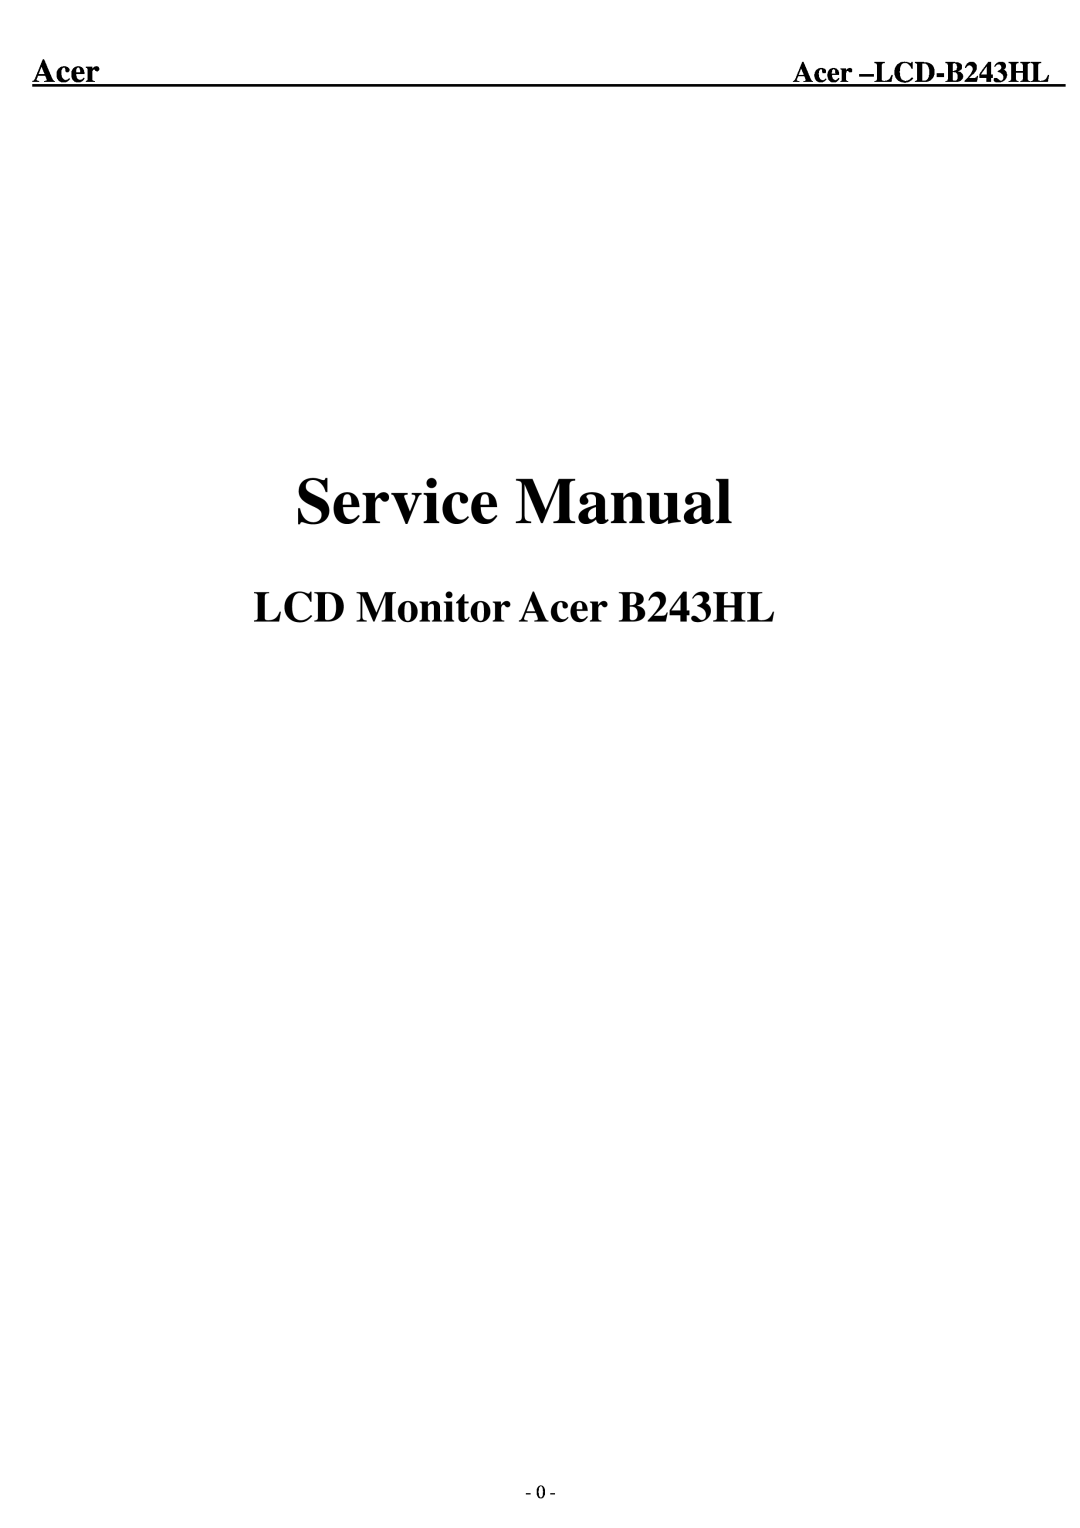 Acer service manual Acer -LCD-B243HL, Service Manual, LCD Monitor Acer B243HL 